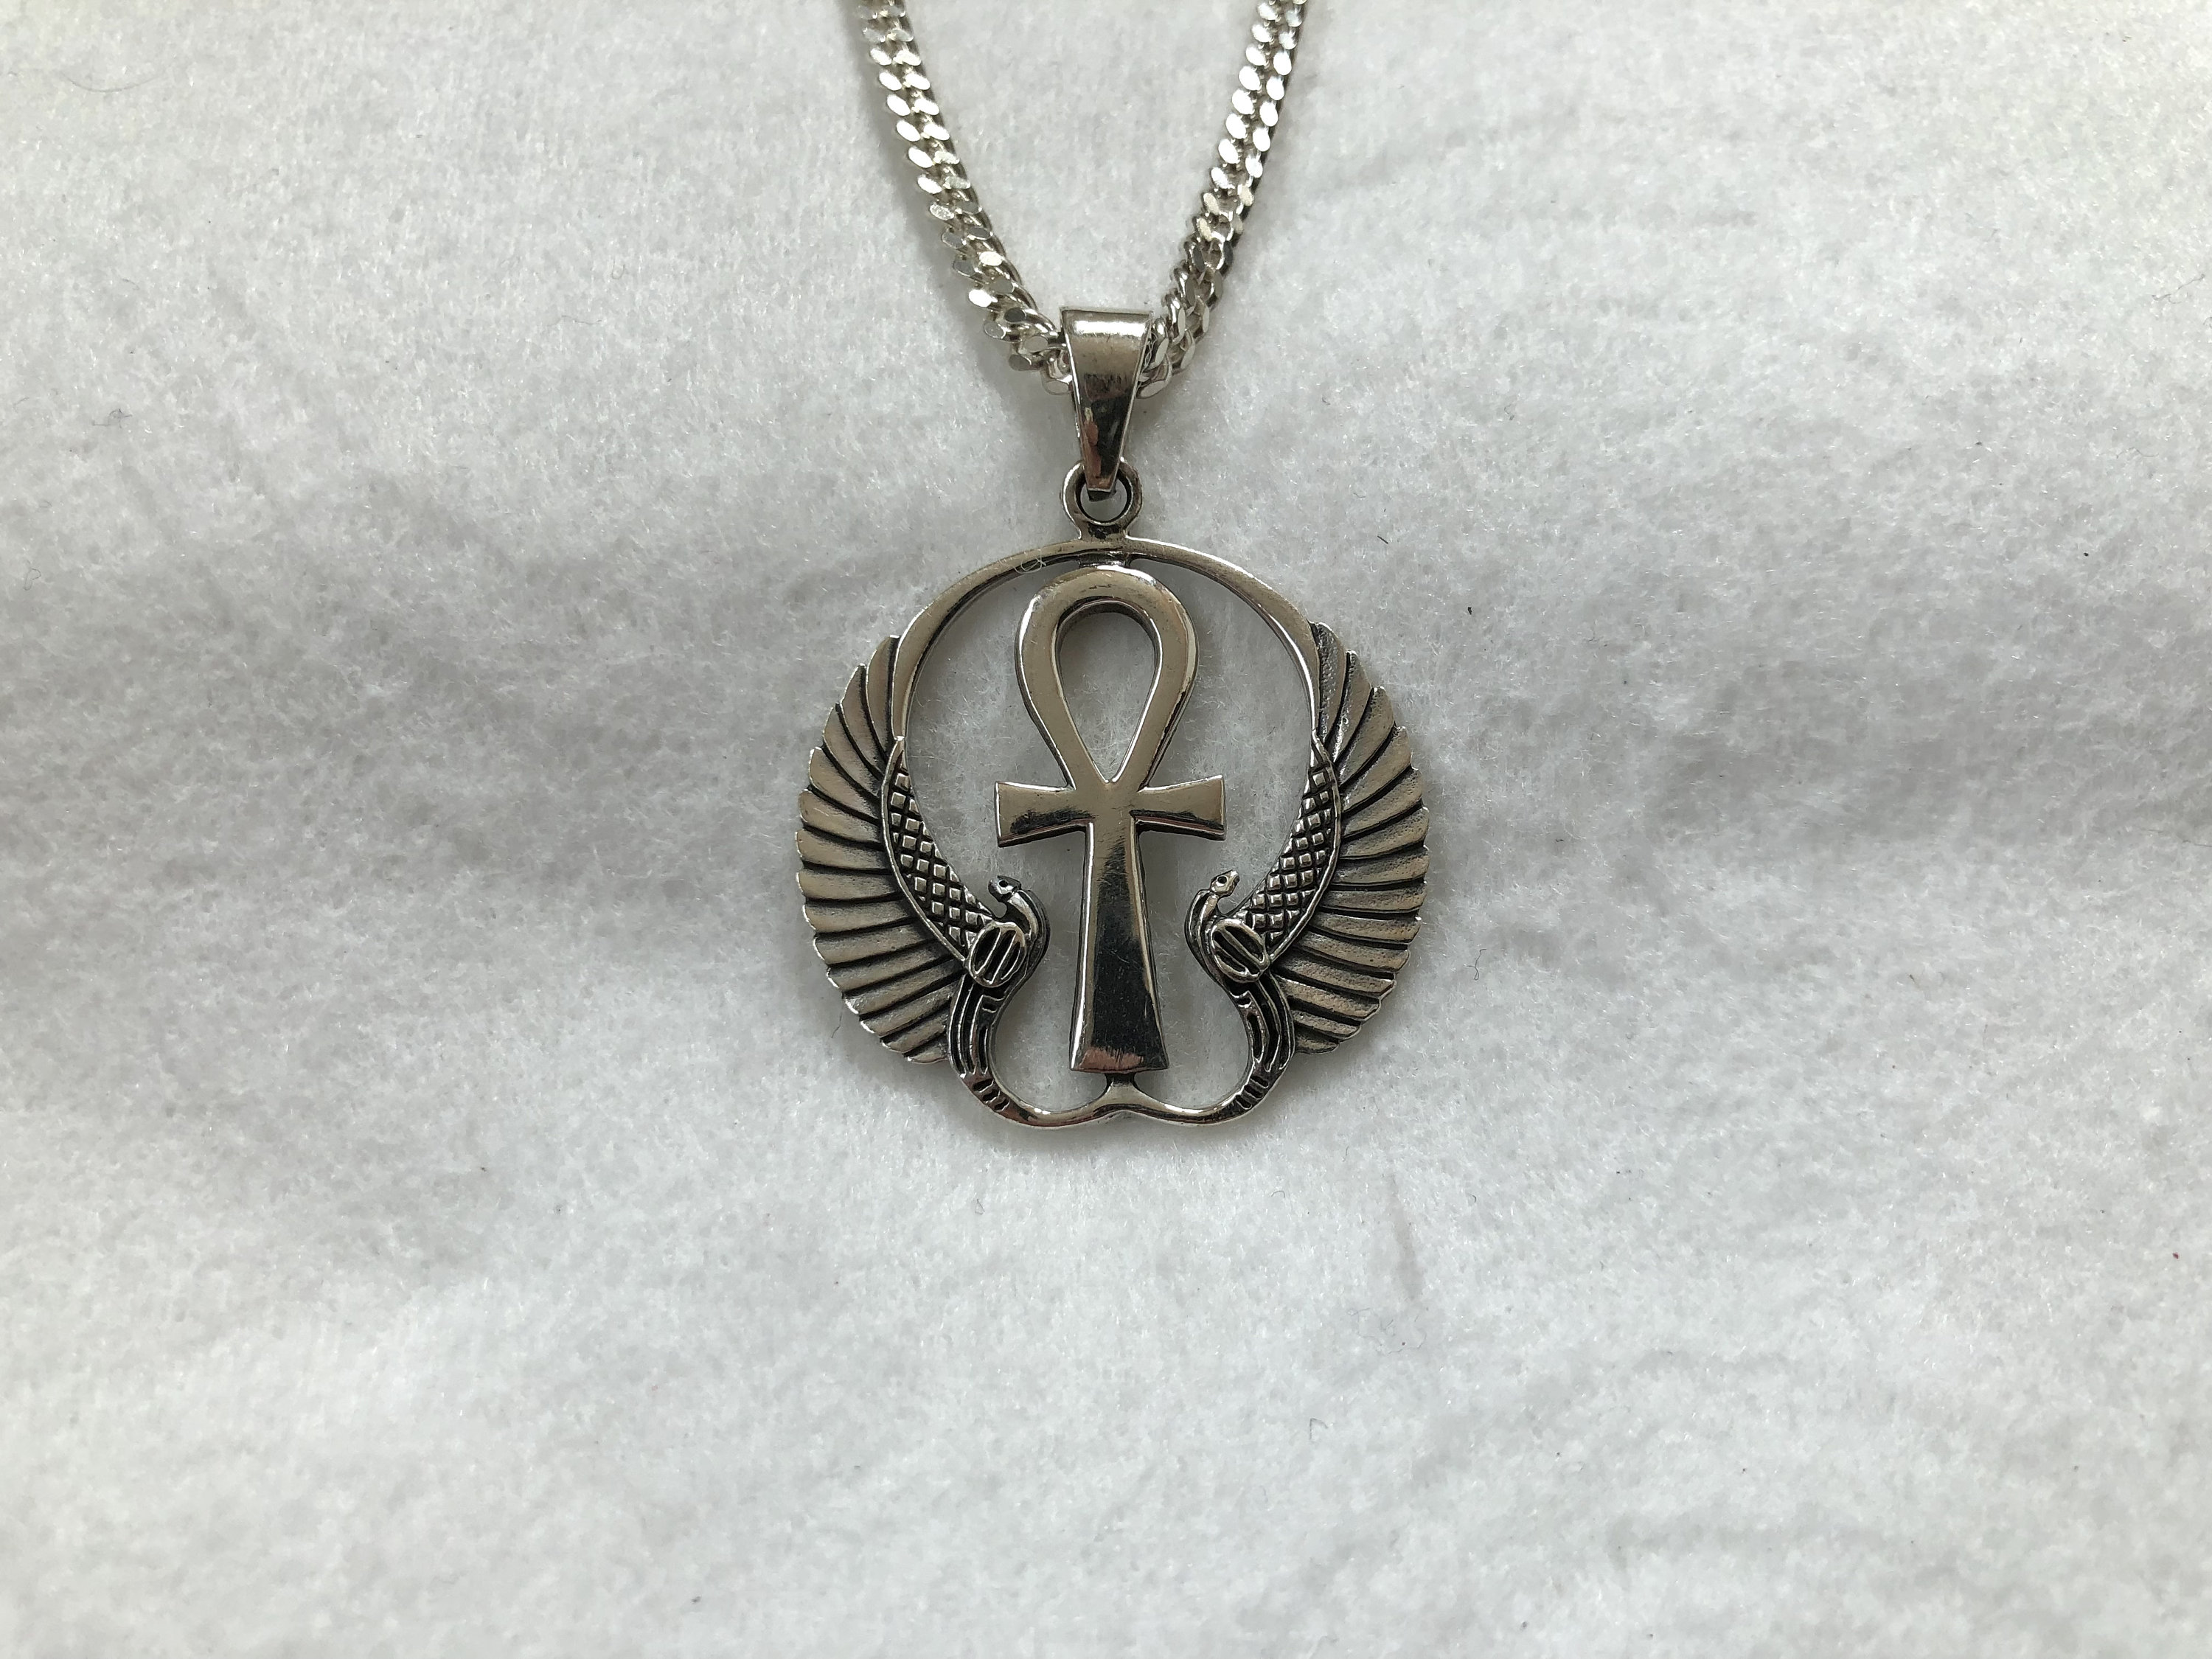 Ankh Sterling Silver Pendant 925 Isis Wing Ankh Cross | Etsy